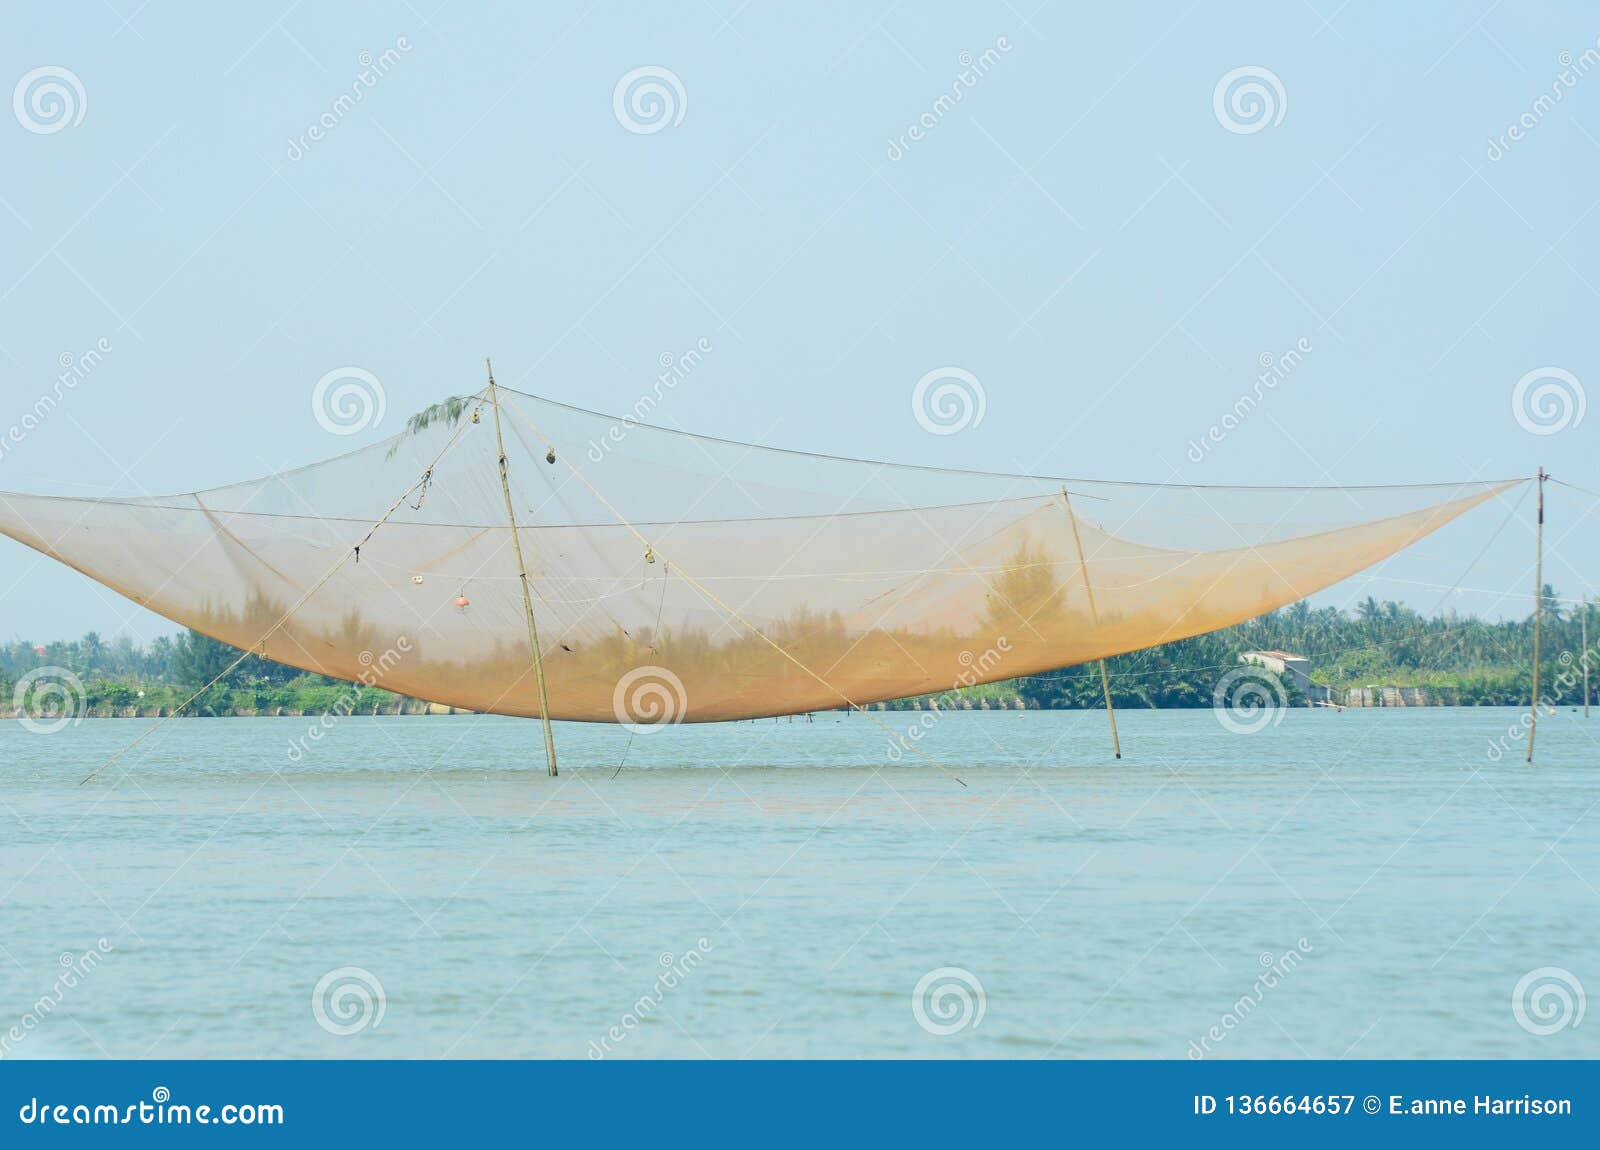 https://thumbs.dreamstime.com/z/large-fishing-net-hanging-over-blue-water-stretched-bamboo-poles-sky-clear-stretch-land-covered-trees-136664657.jpg